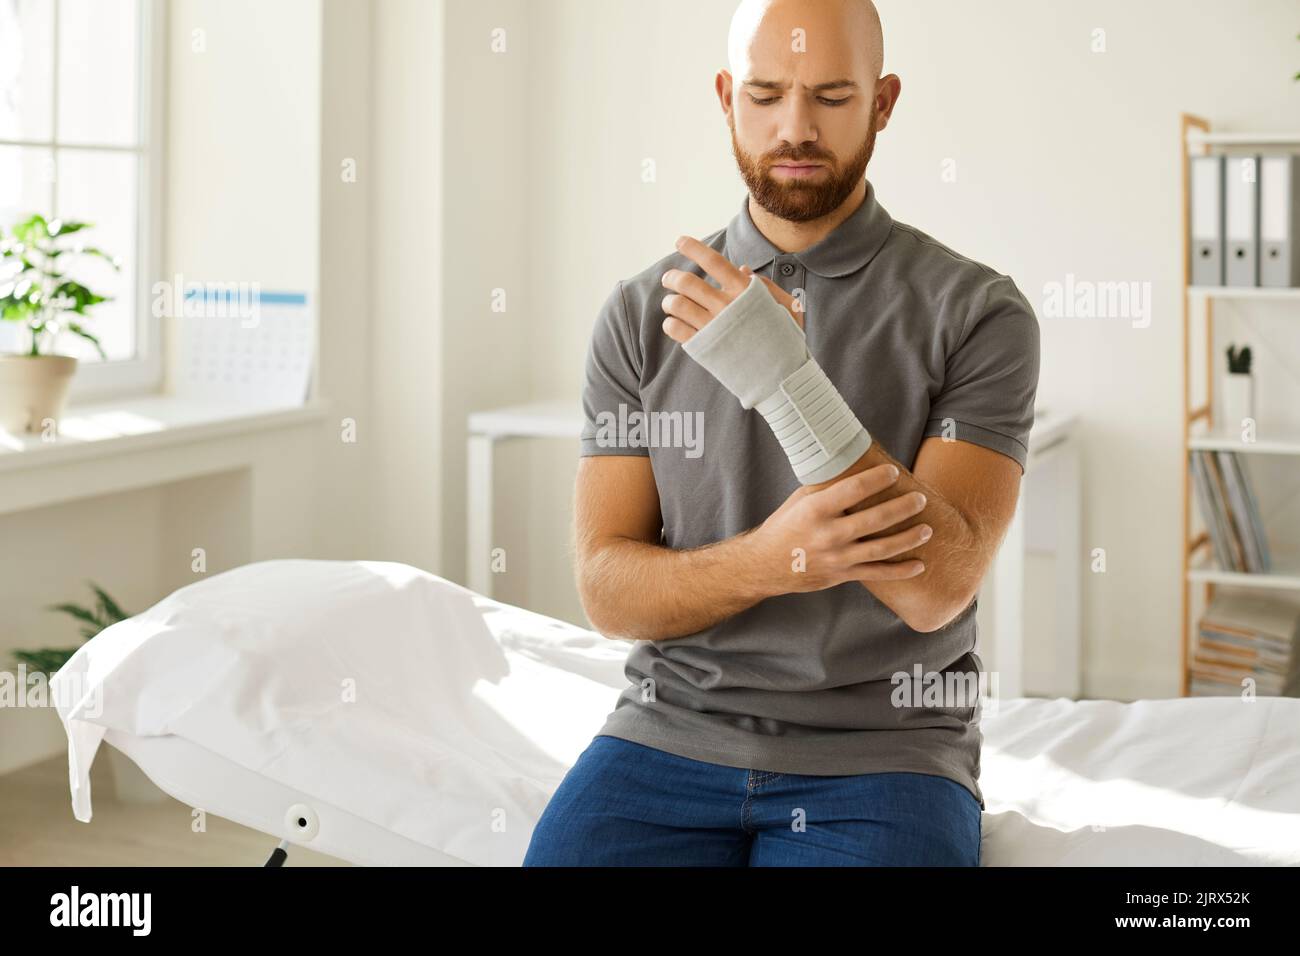 Injured man was put on medical bandage for his wrist at hospital after receiving arm injury. Stock Photo